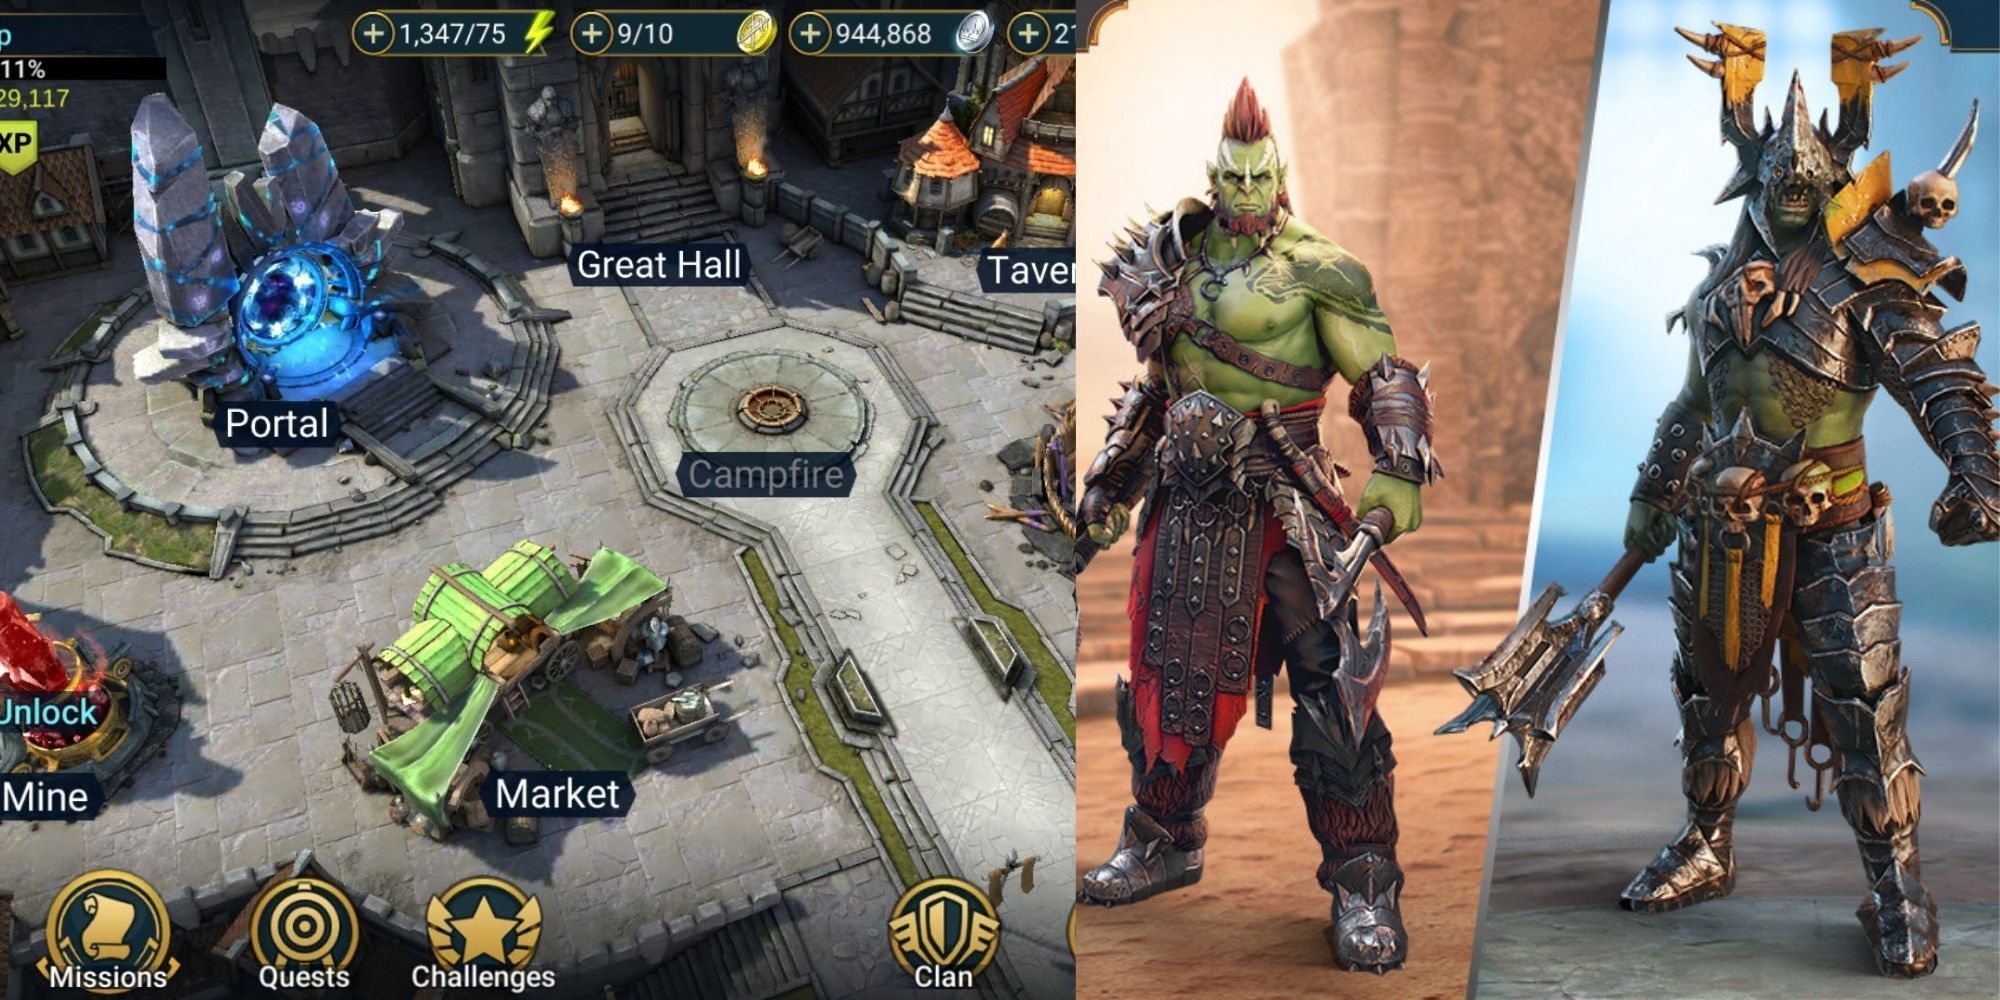 Split image of the main screen from Raid Shadow Legends as well as the character of Galek.